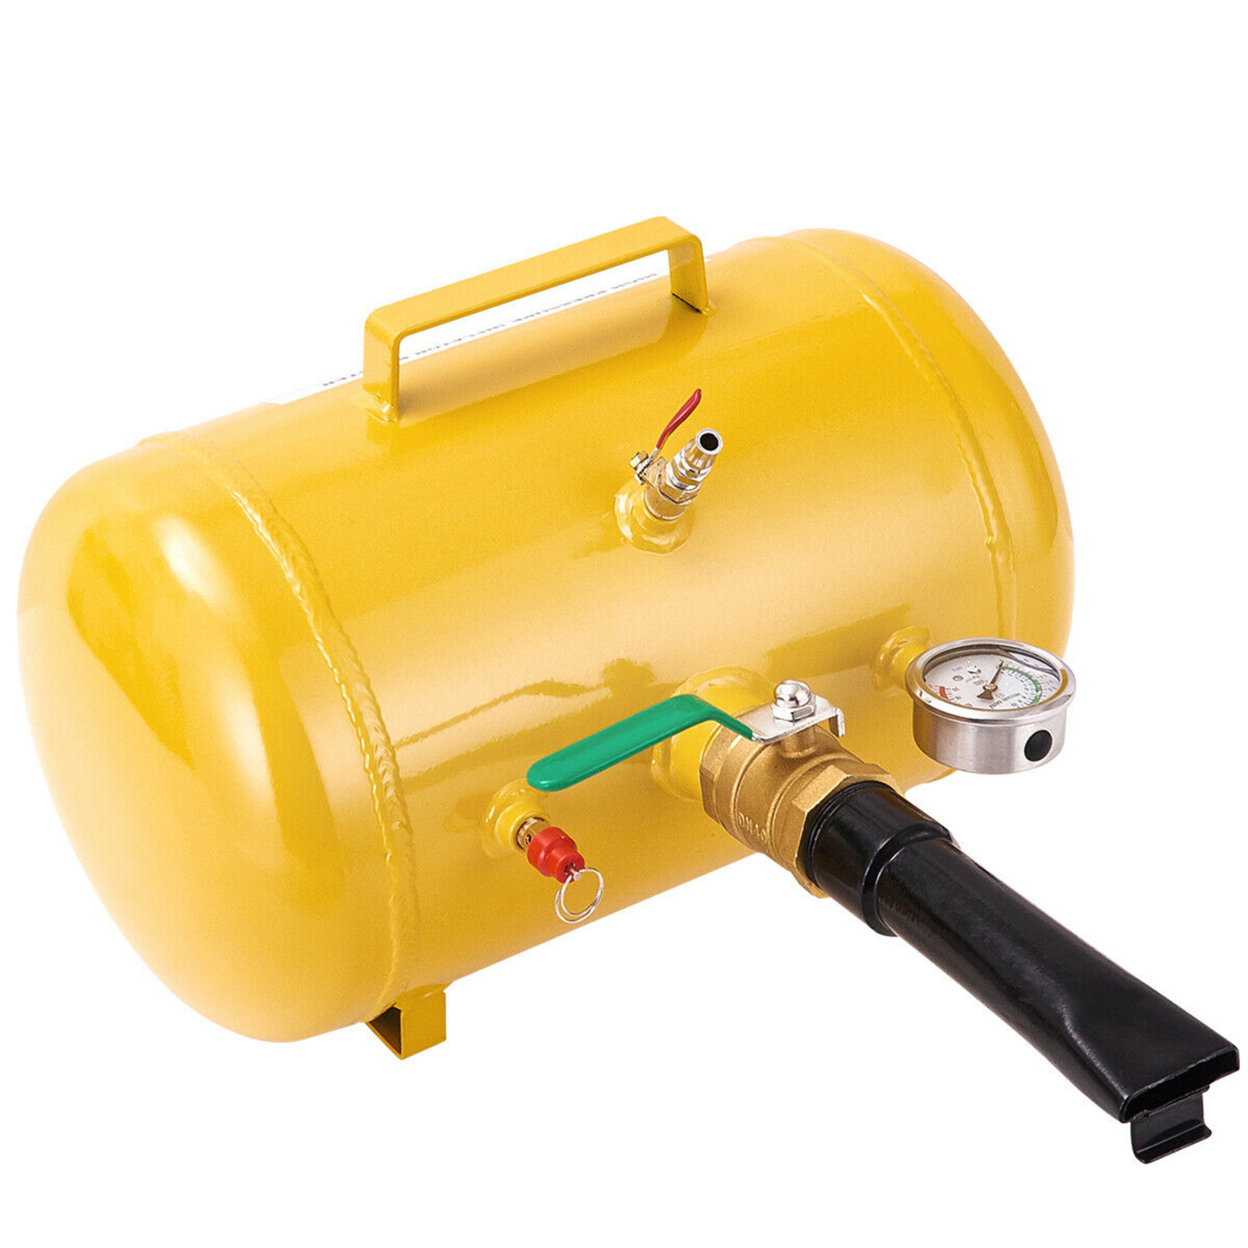 5 Gallon Compact Air Tire Bead Seater Blaster Tool